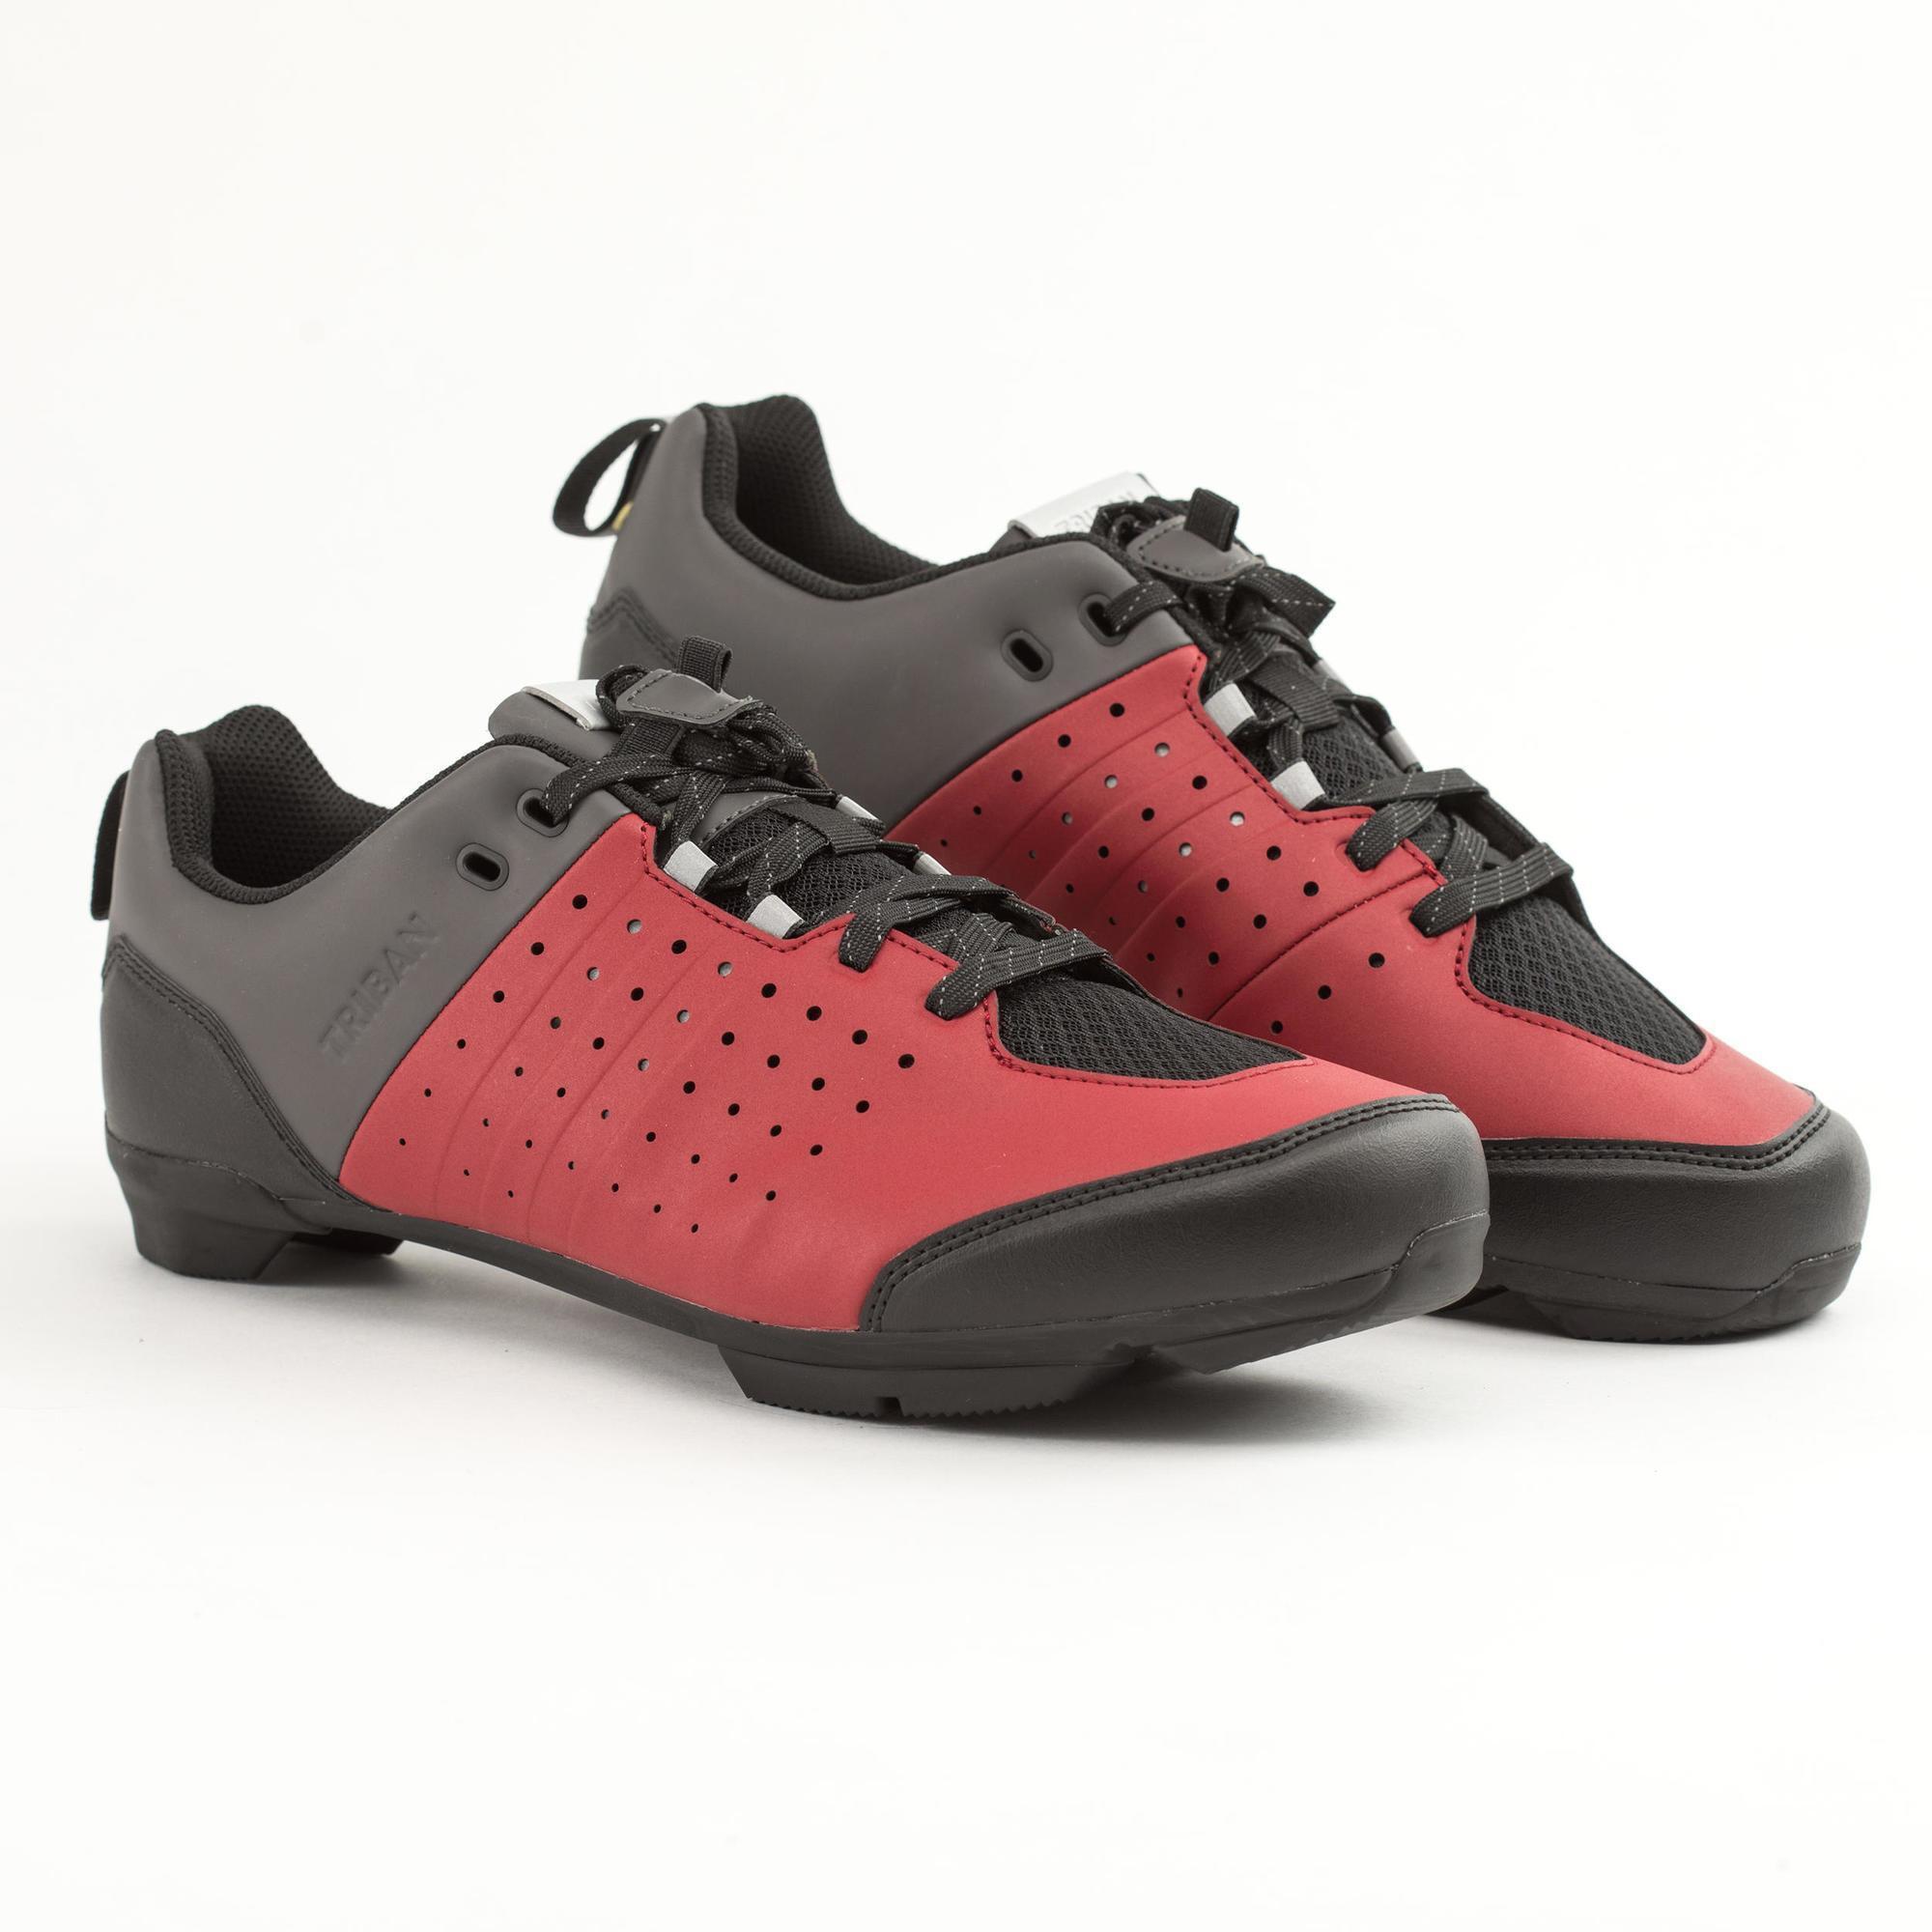 Road and Gravel Cycling Lace-Up SPD Shoes GRVL 500 - Burgundy / Grey 2/7